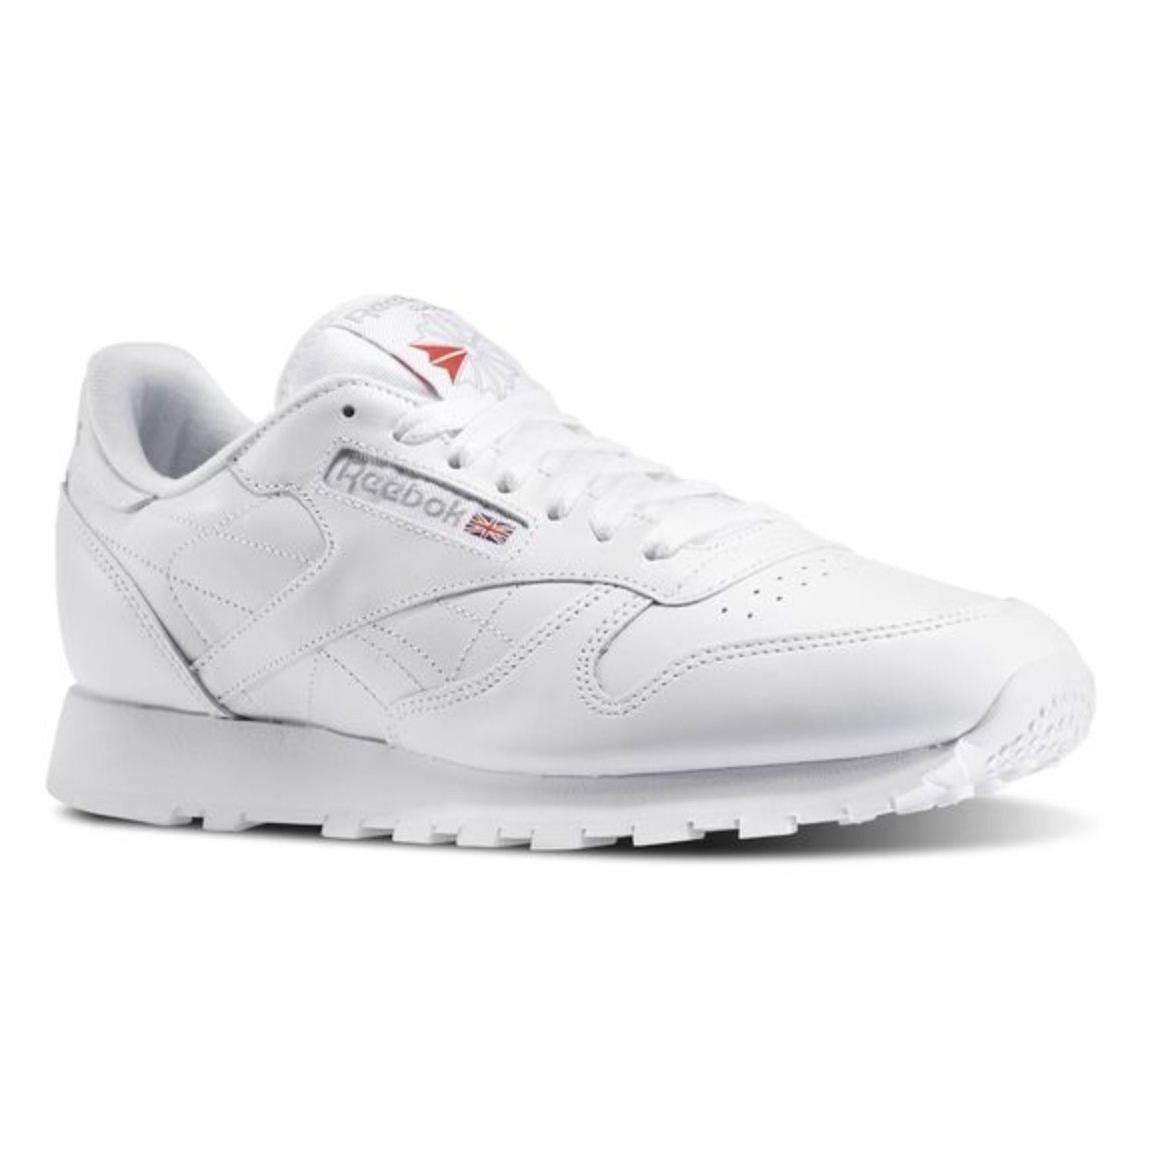 Reebok Classic Leather White Grey 9771 Mens Classic Running Shoes - White/White/LT Grey